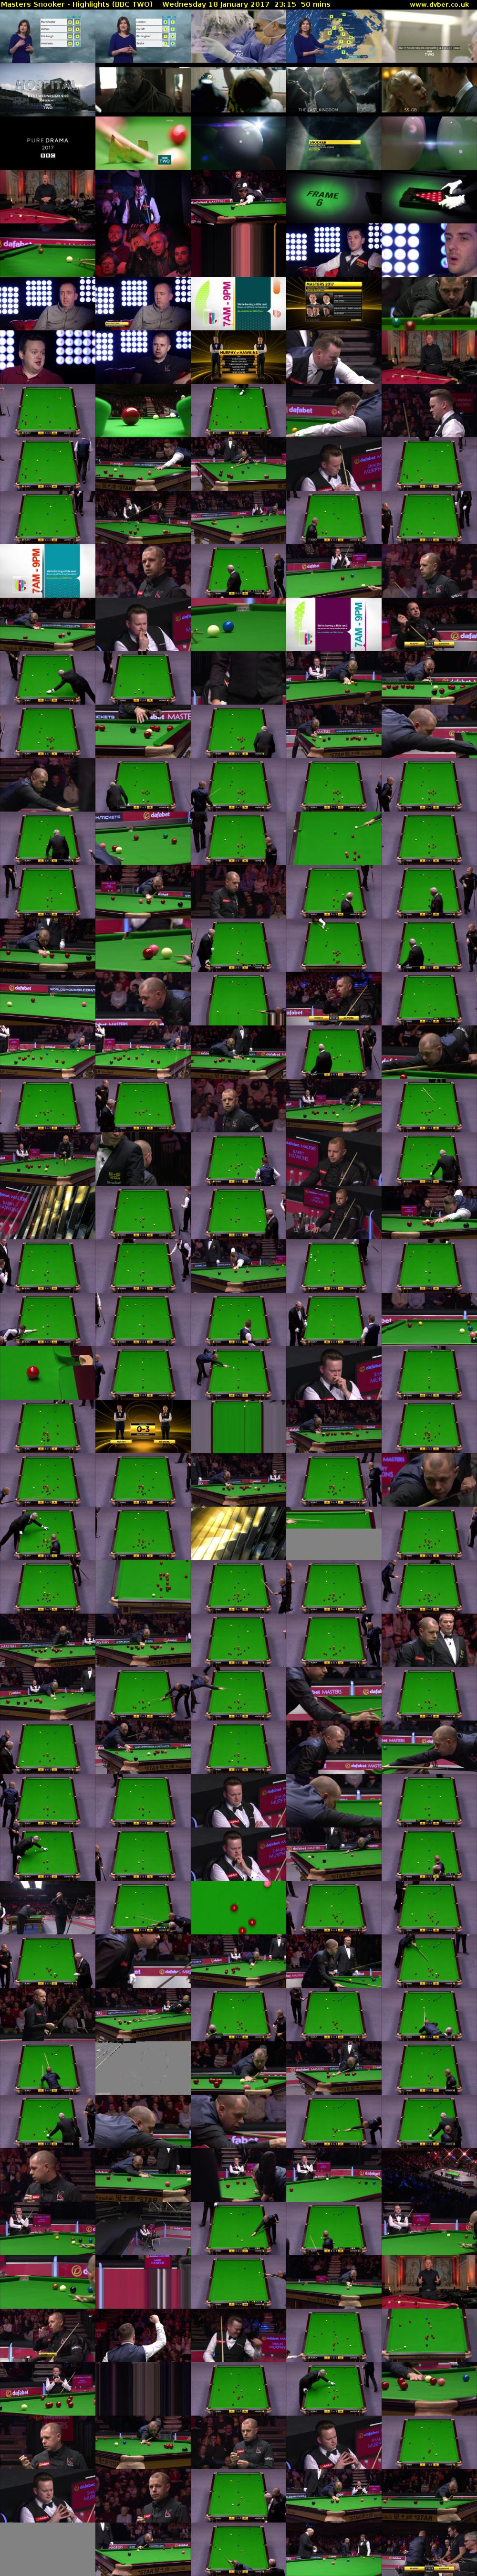 Masters Snooker - Highlights (BBC TWO) Wednesday 18 January 2017 23:15 - 00:05